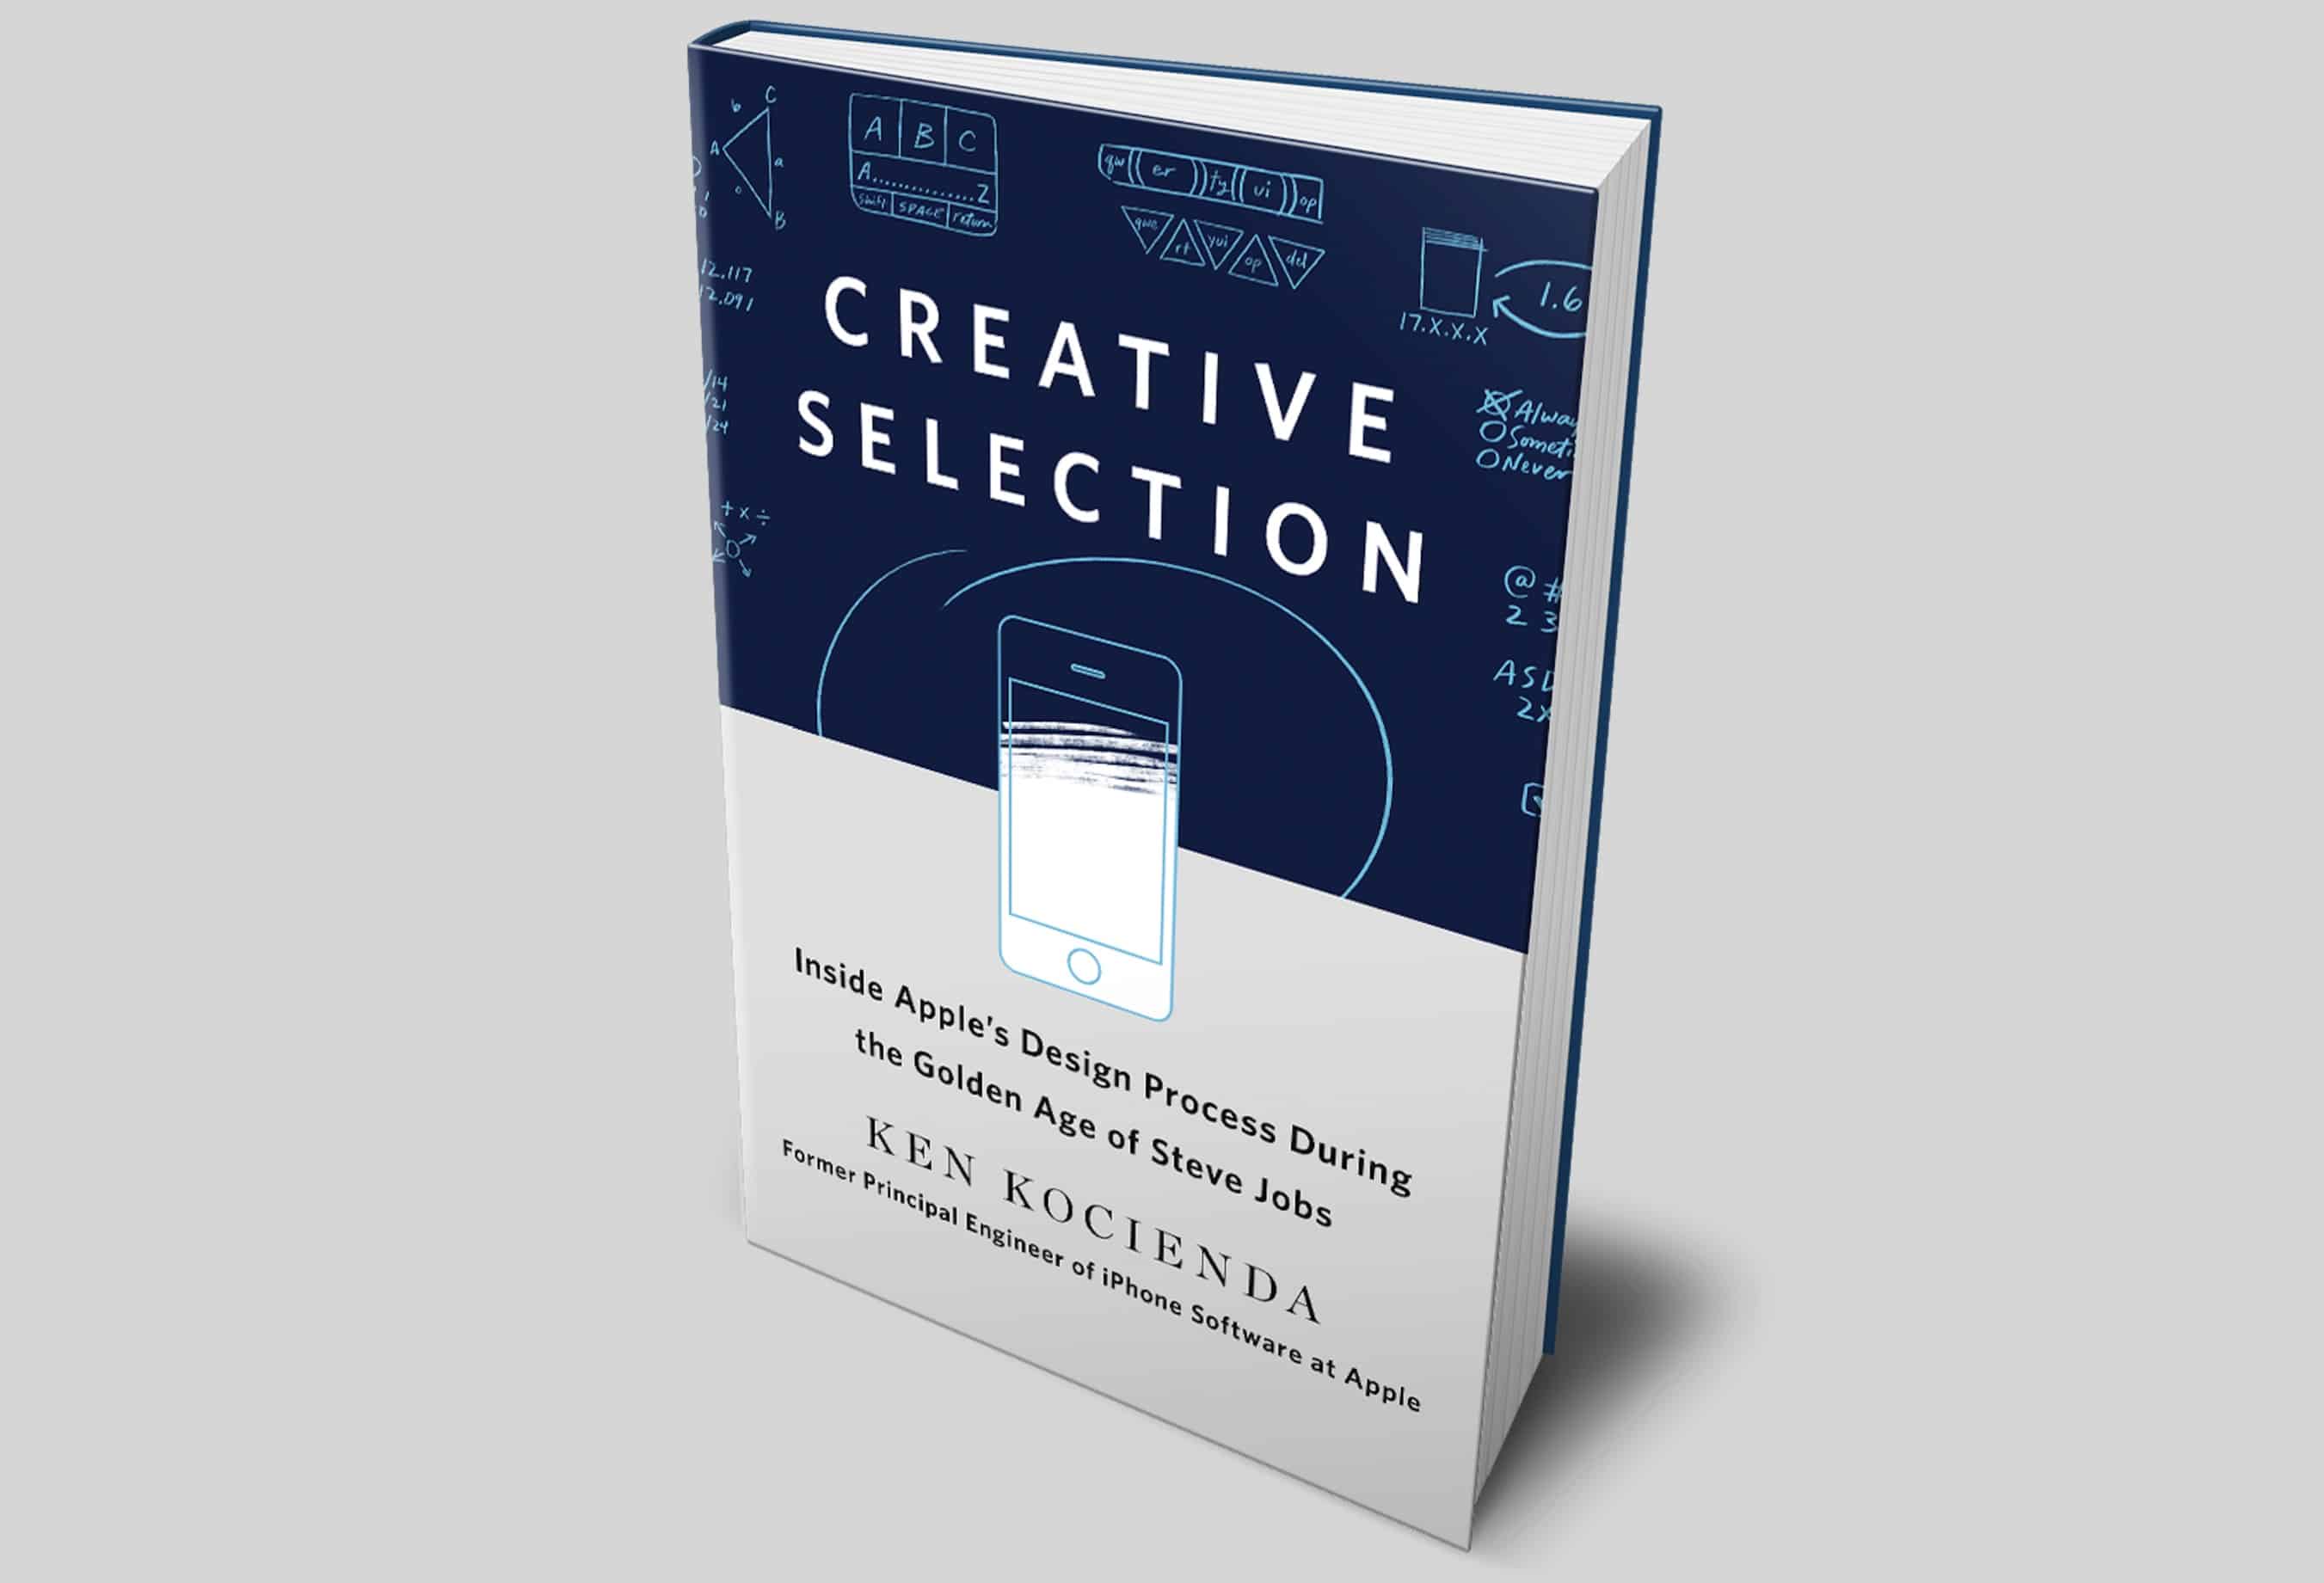 Ken Kocienda's book, Creative Selection: Inside Apple's Design Process During the Golden Age of Stave Jobs.